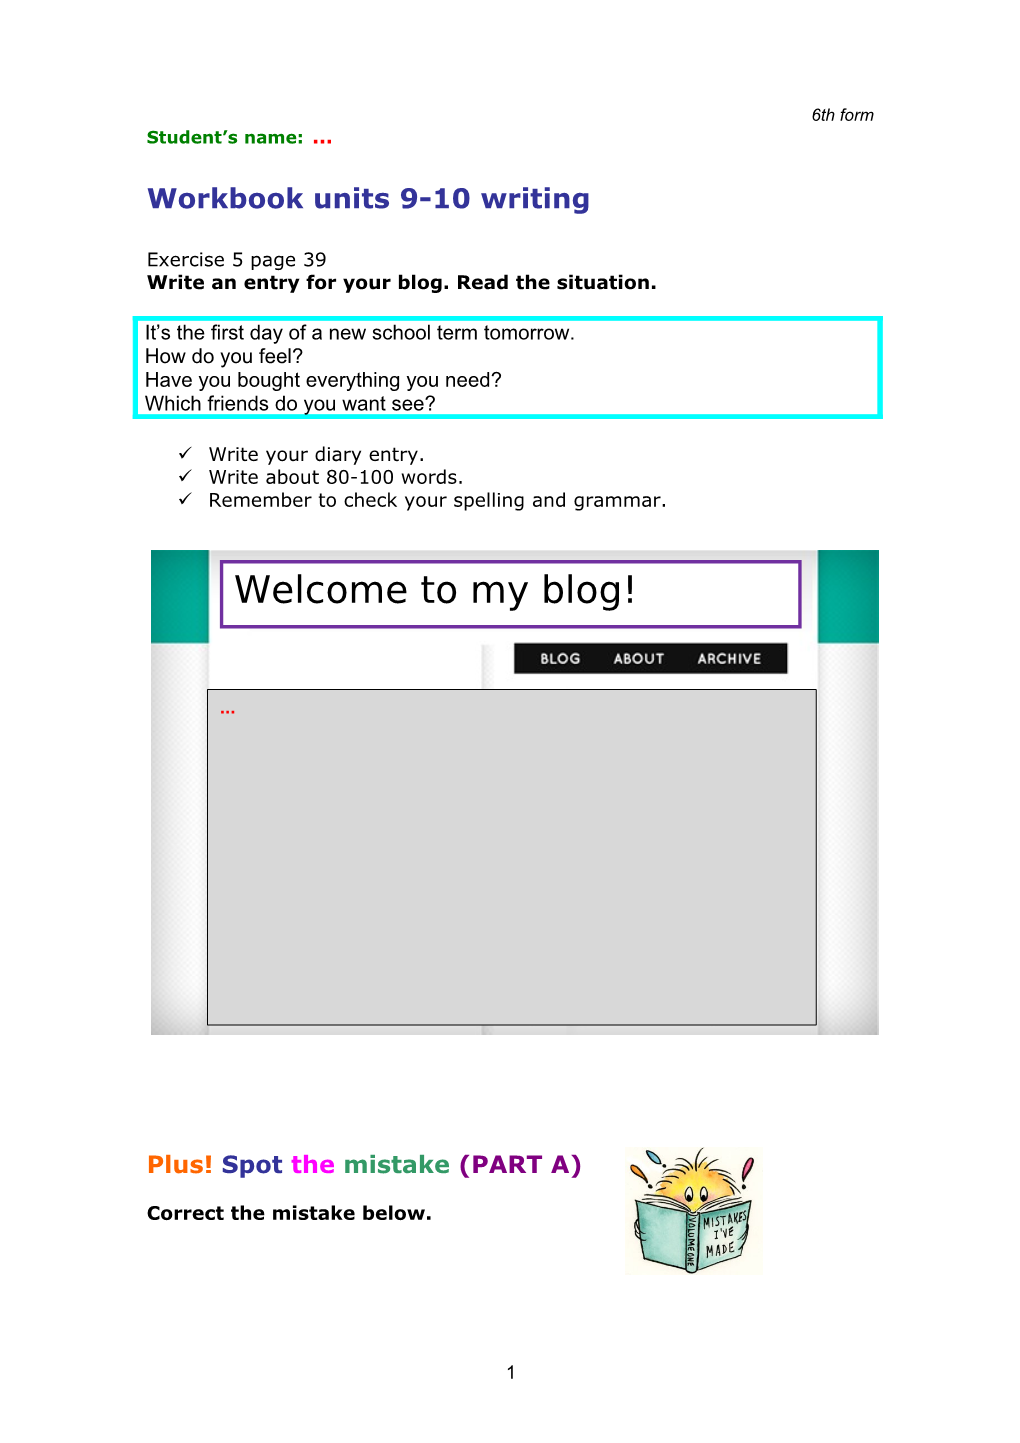 Write an Entry for Your Blog. Read the Situation